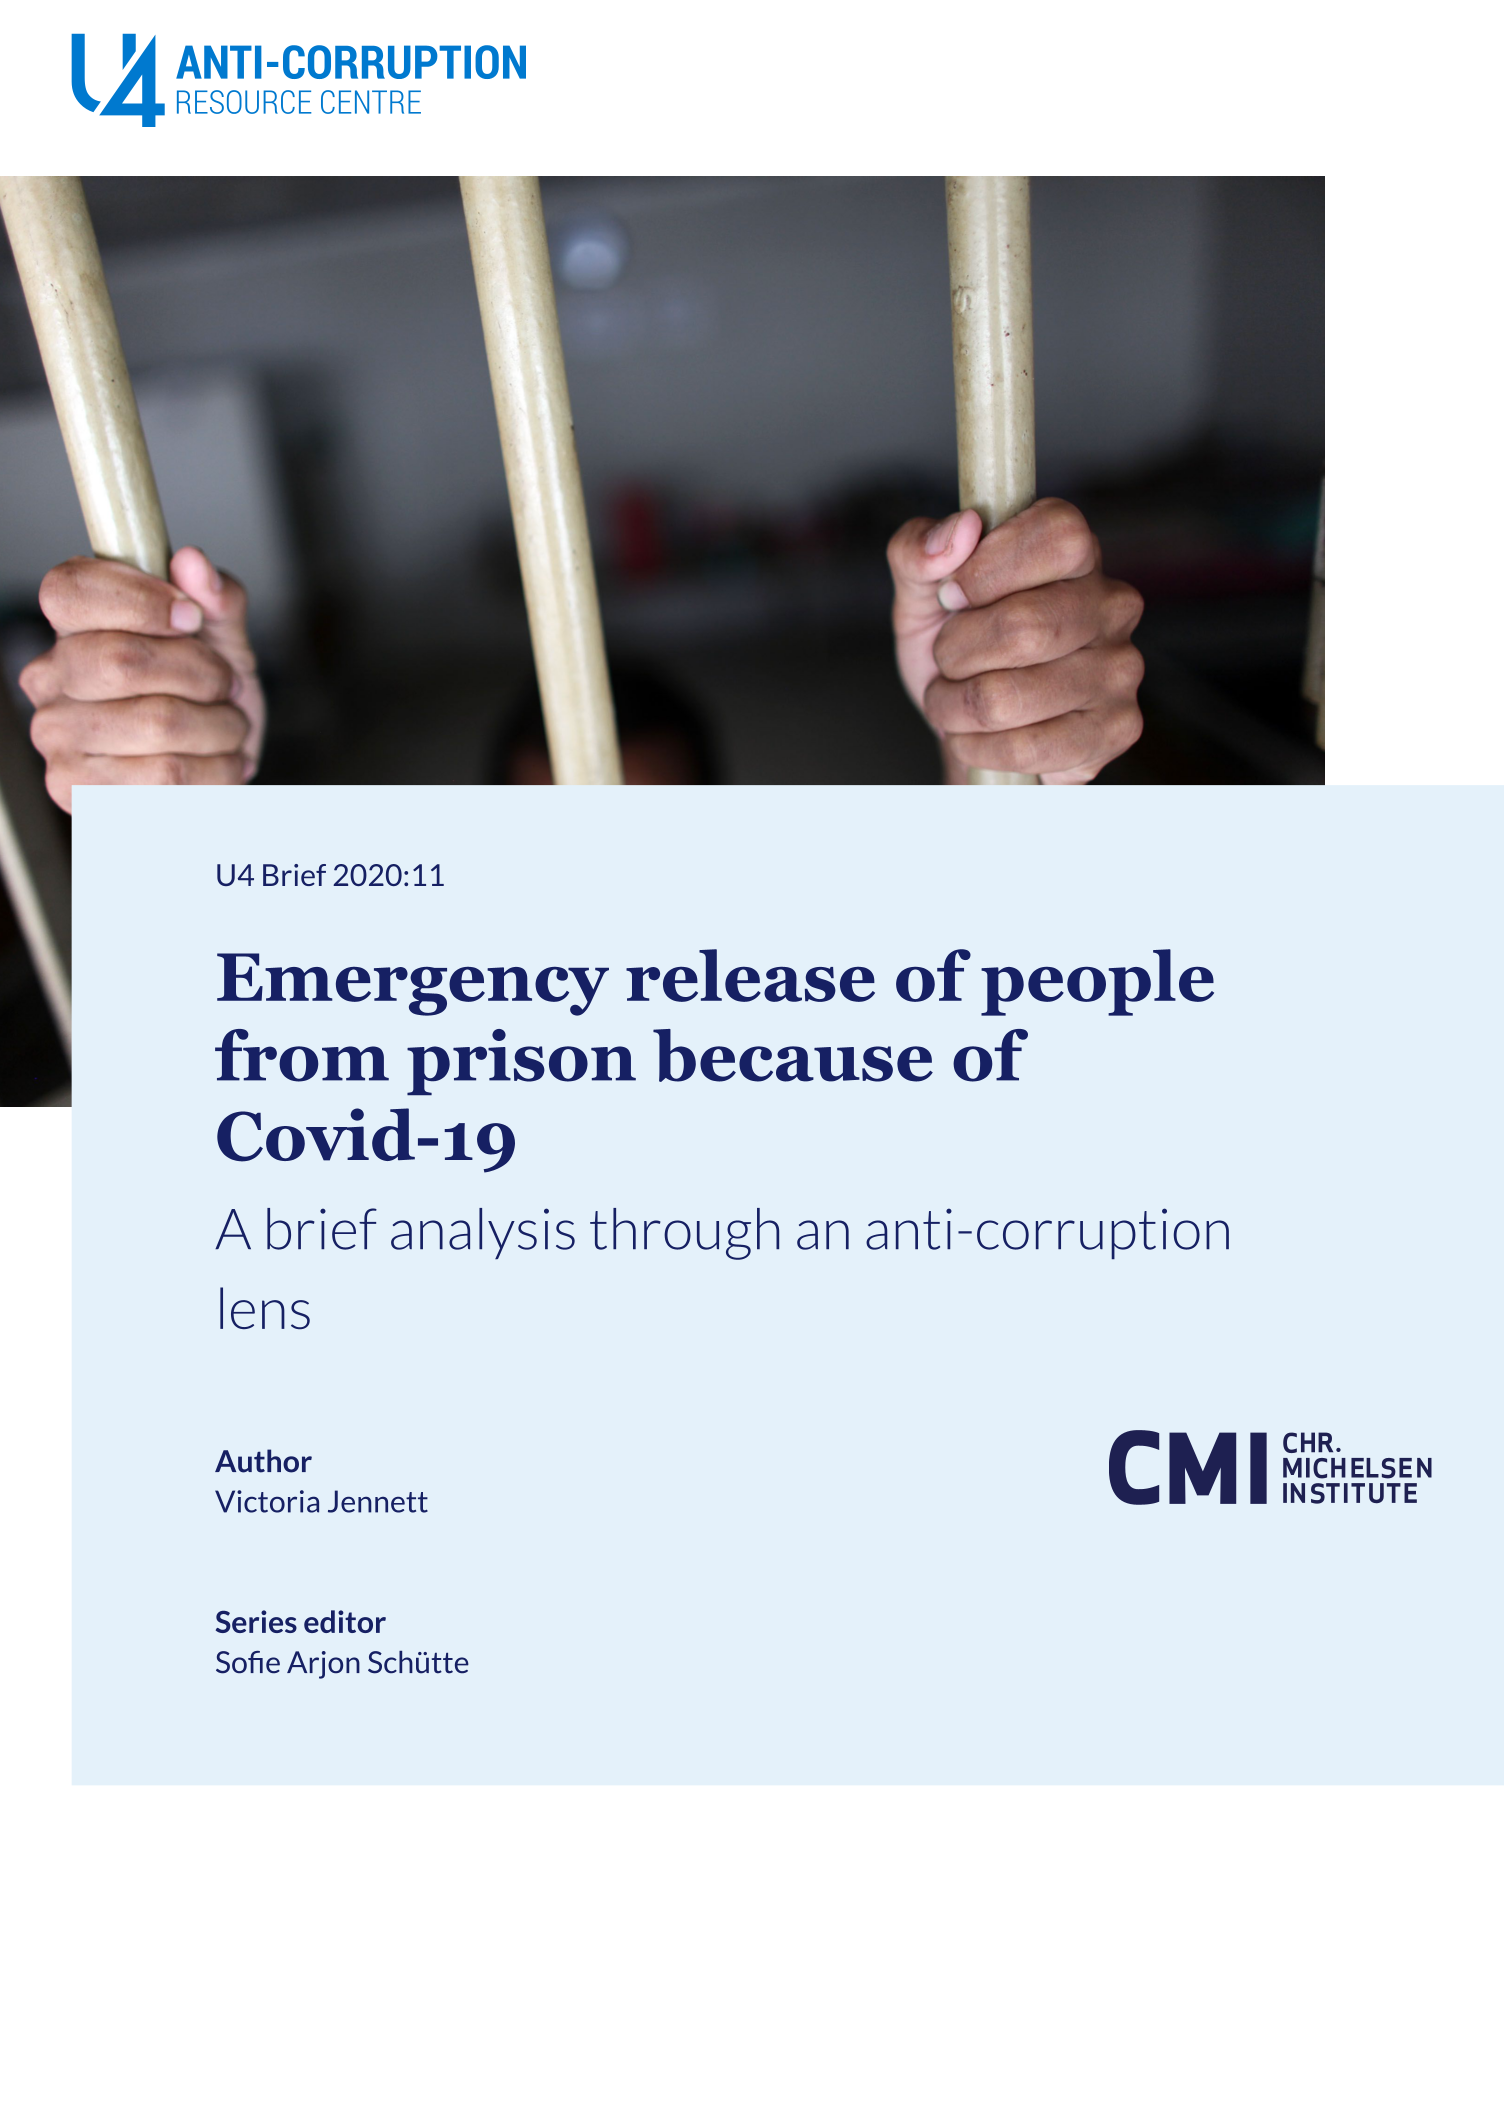 Emergency release of people from prison because of Covid-19